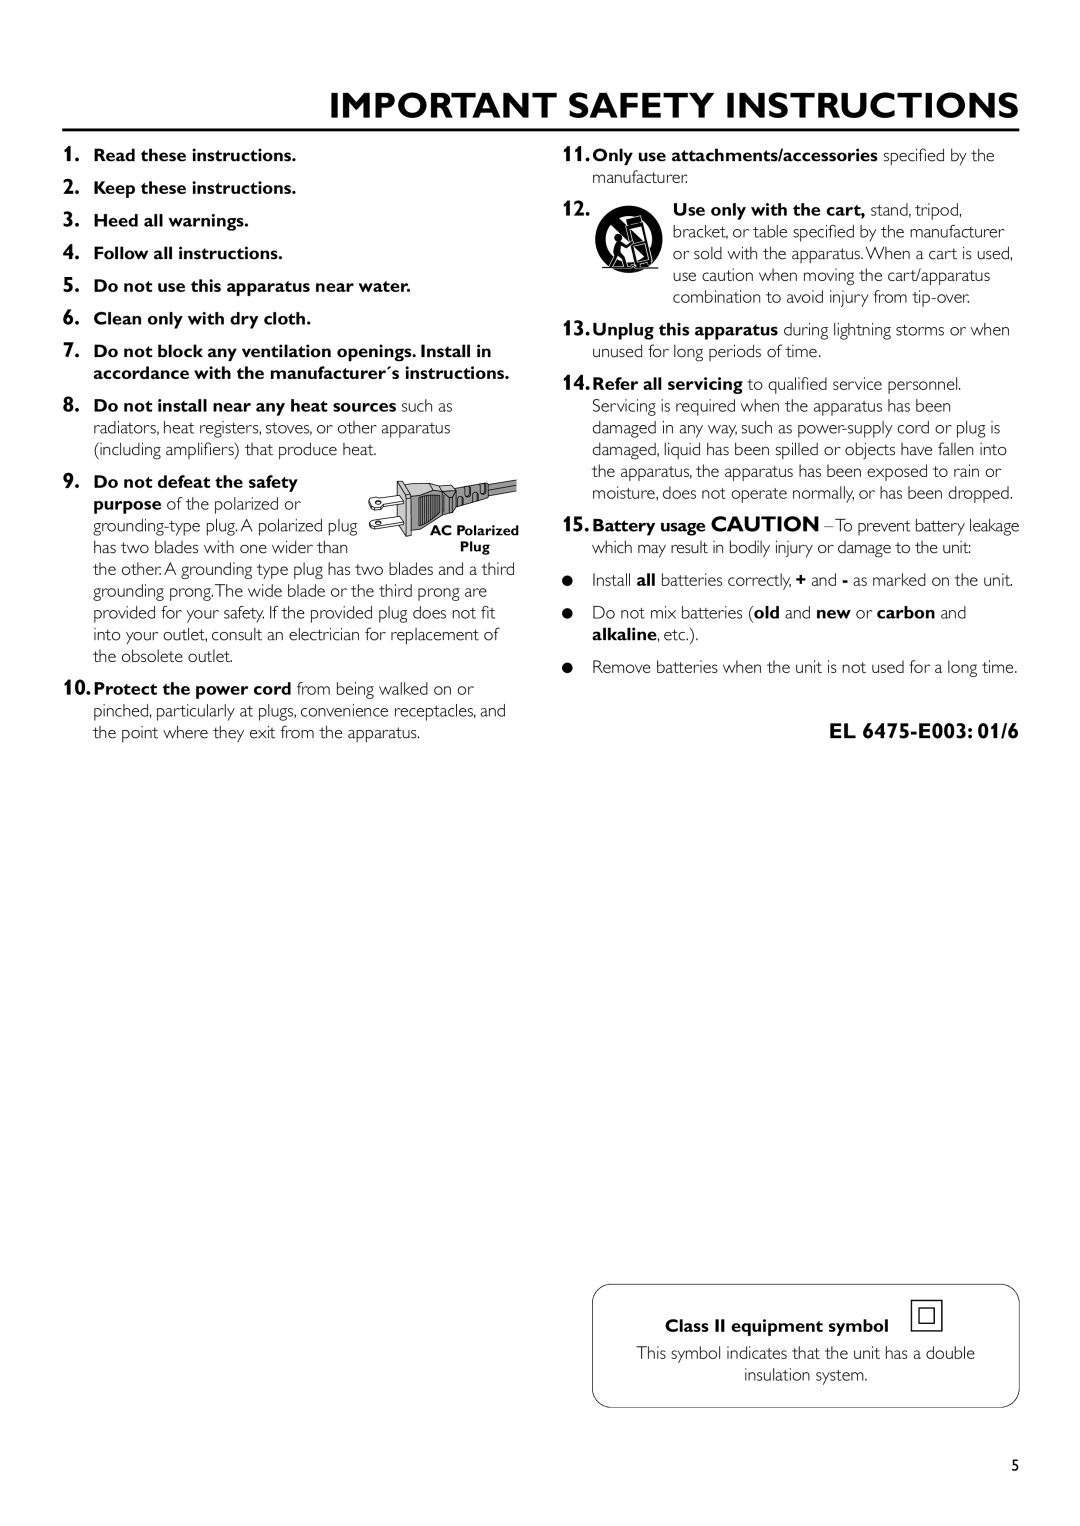 Philips CDR-795 manual Important Safety Instructions, EL 6475-E003 01/6, Read these instructions 2. Keep these instructions 